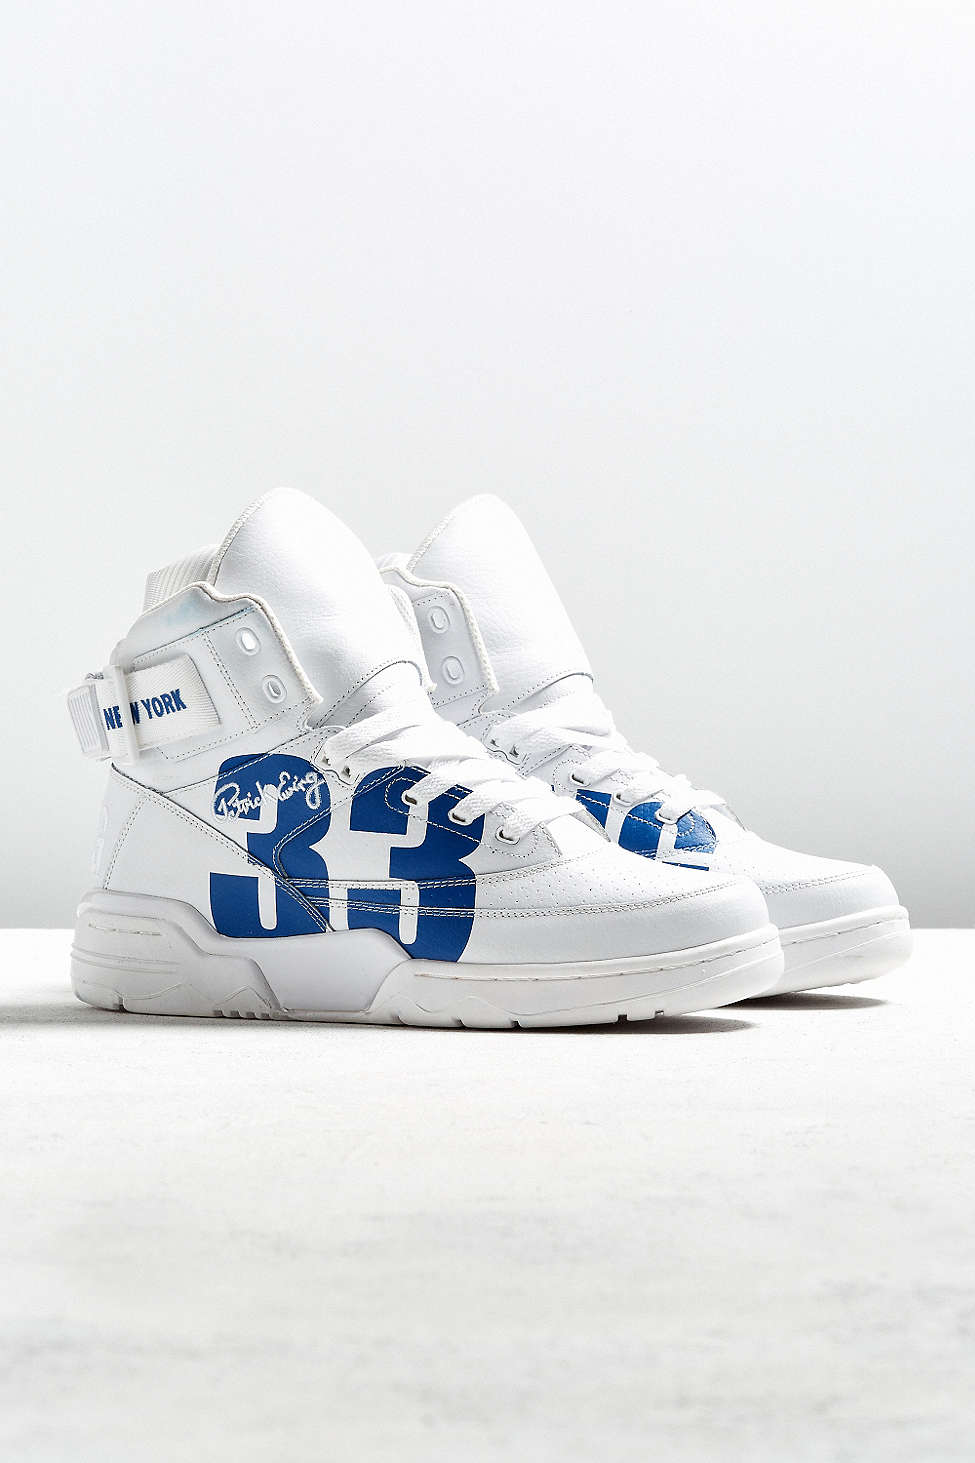 urban outfitters x ewing 33 hi NYC white royal 2